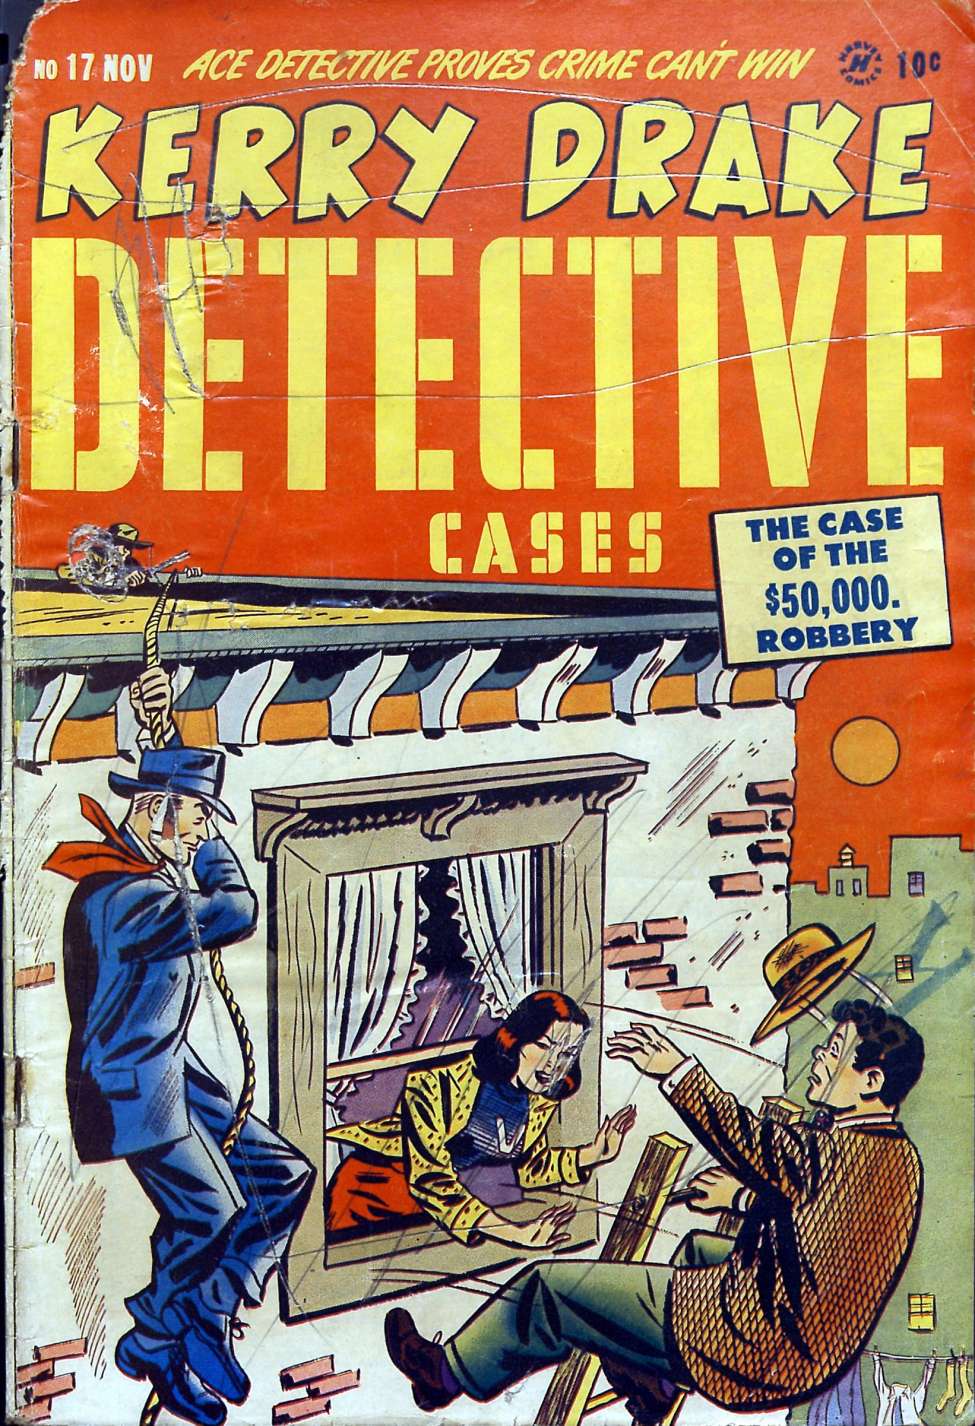 Comic Book Cover For Kerry Drake Detective Cases 17